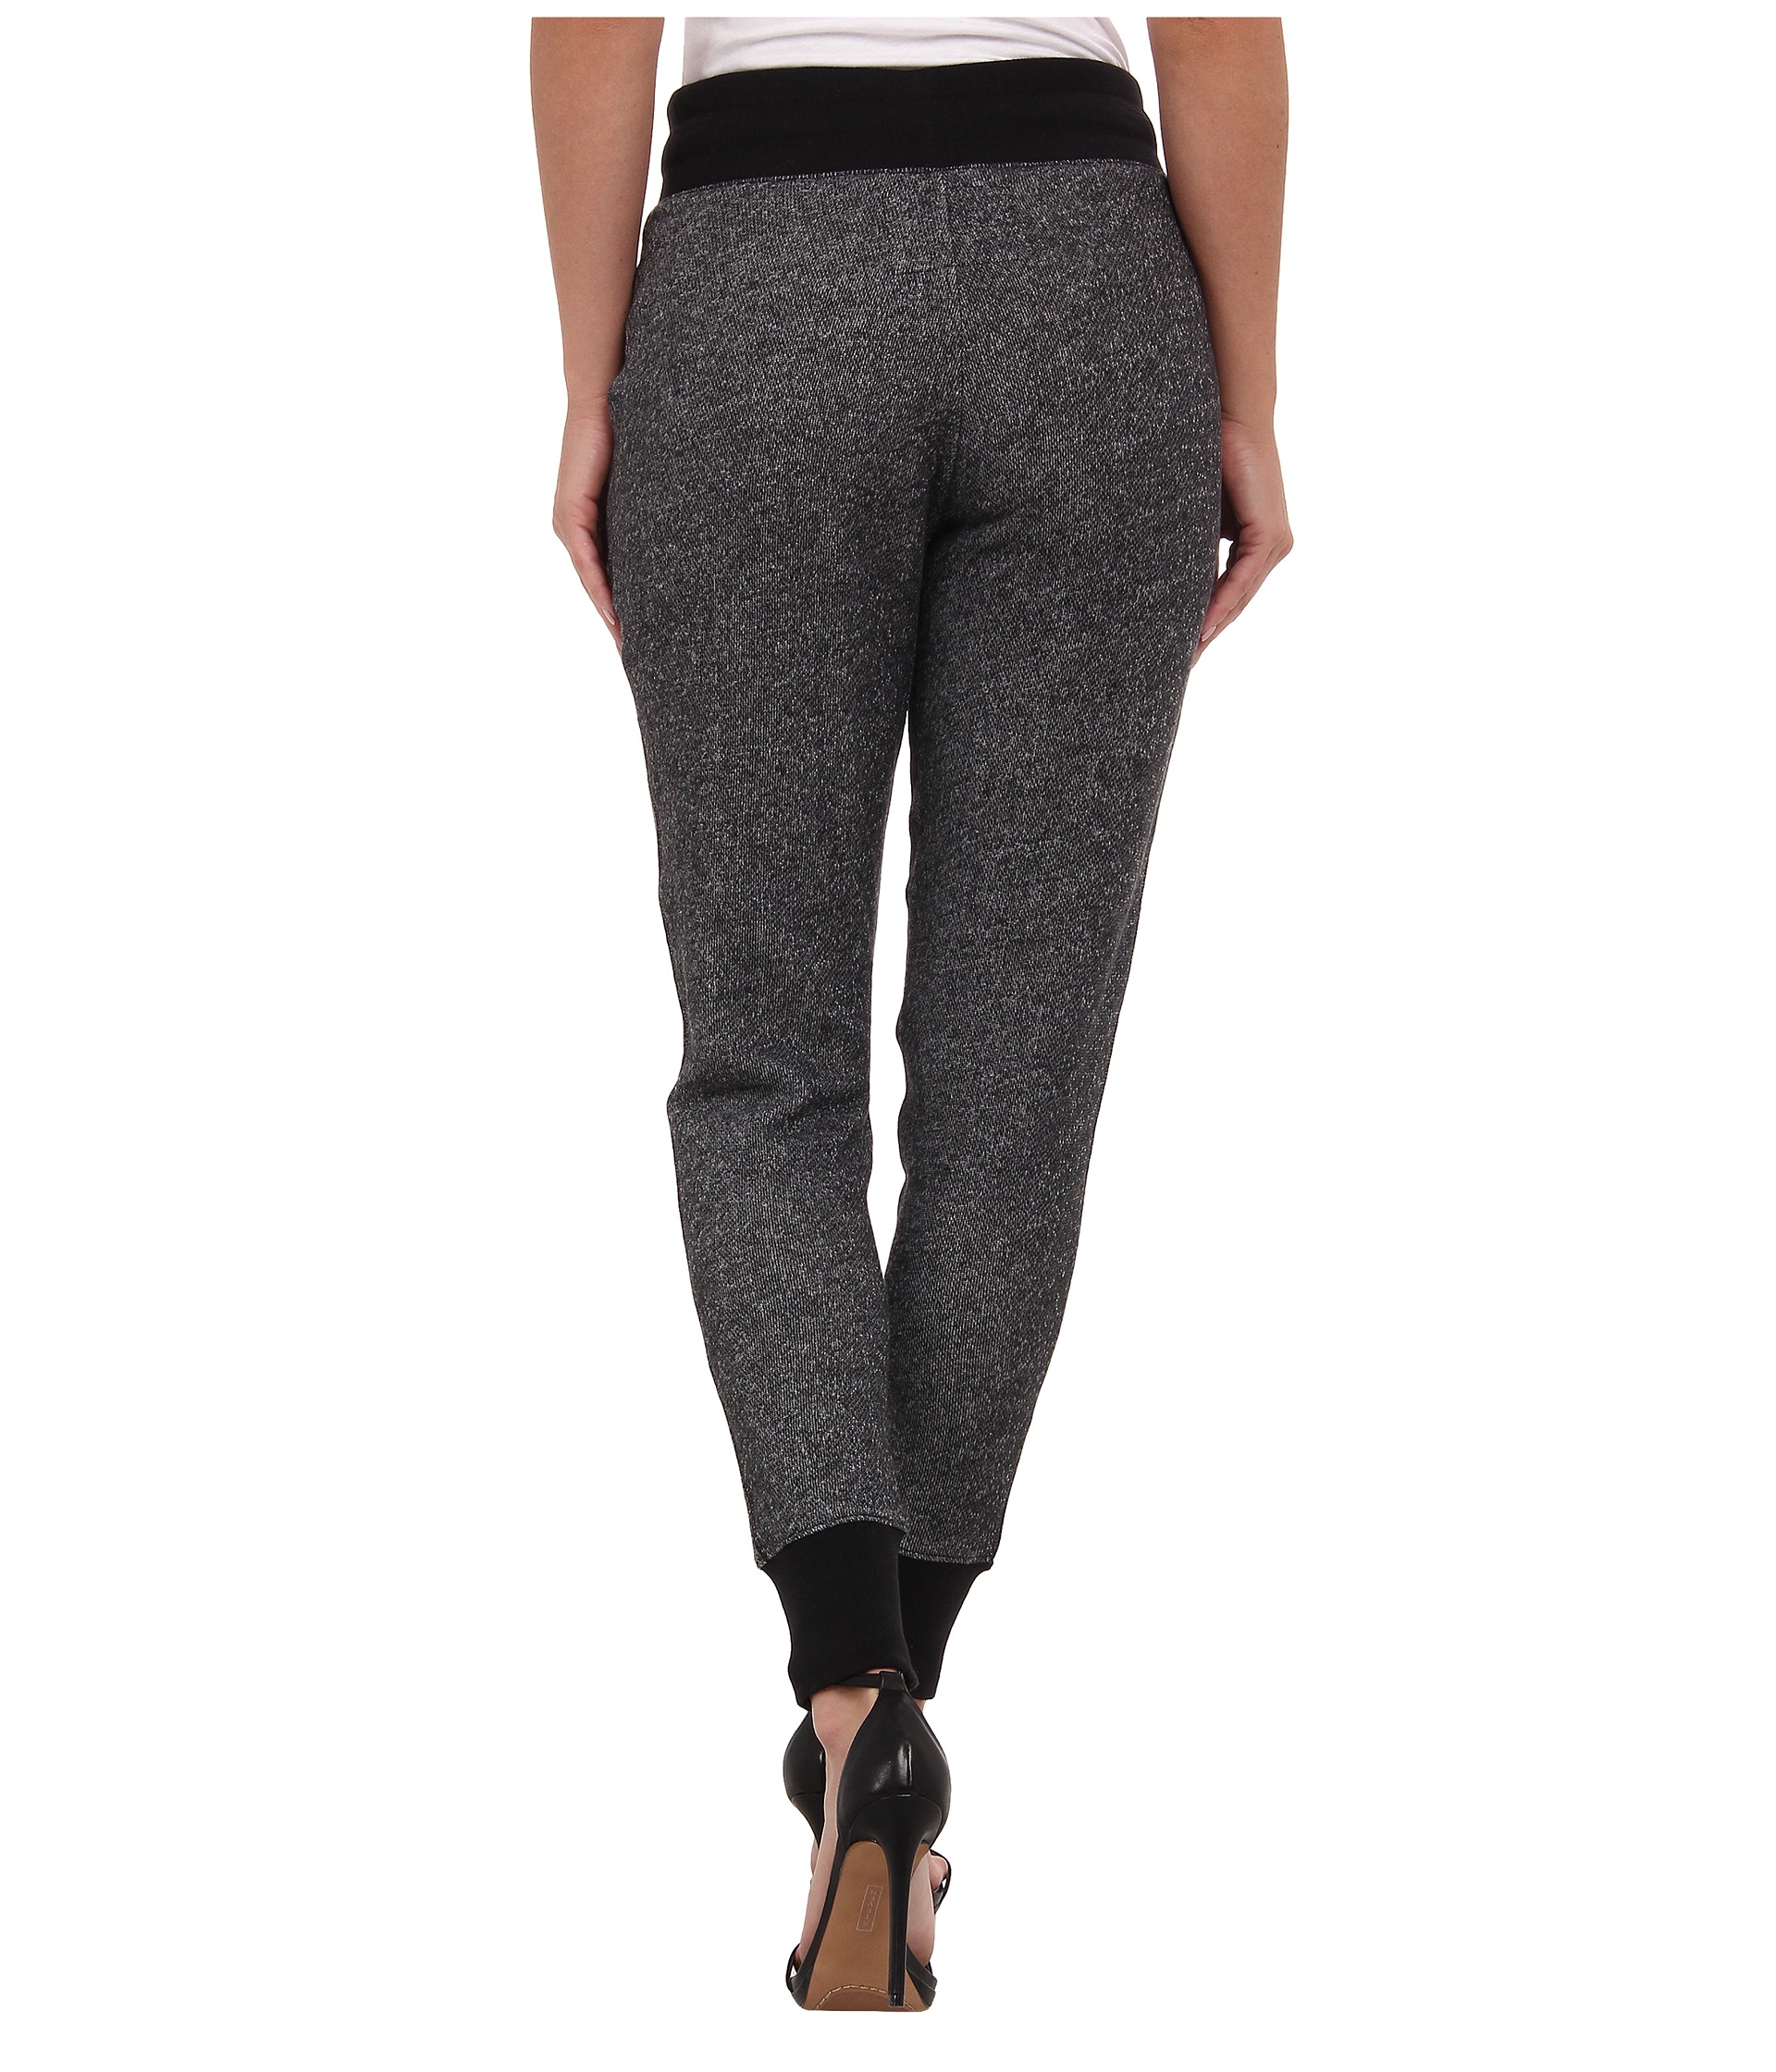 Dkny Jeans Grindle Sweatpant, Clothing | Shipped Free at Zappos